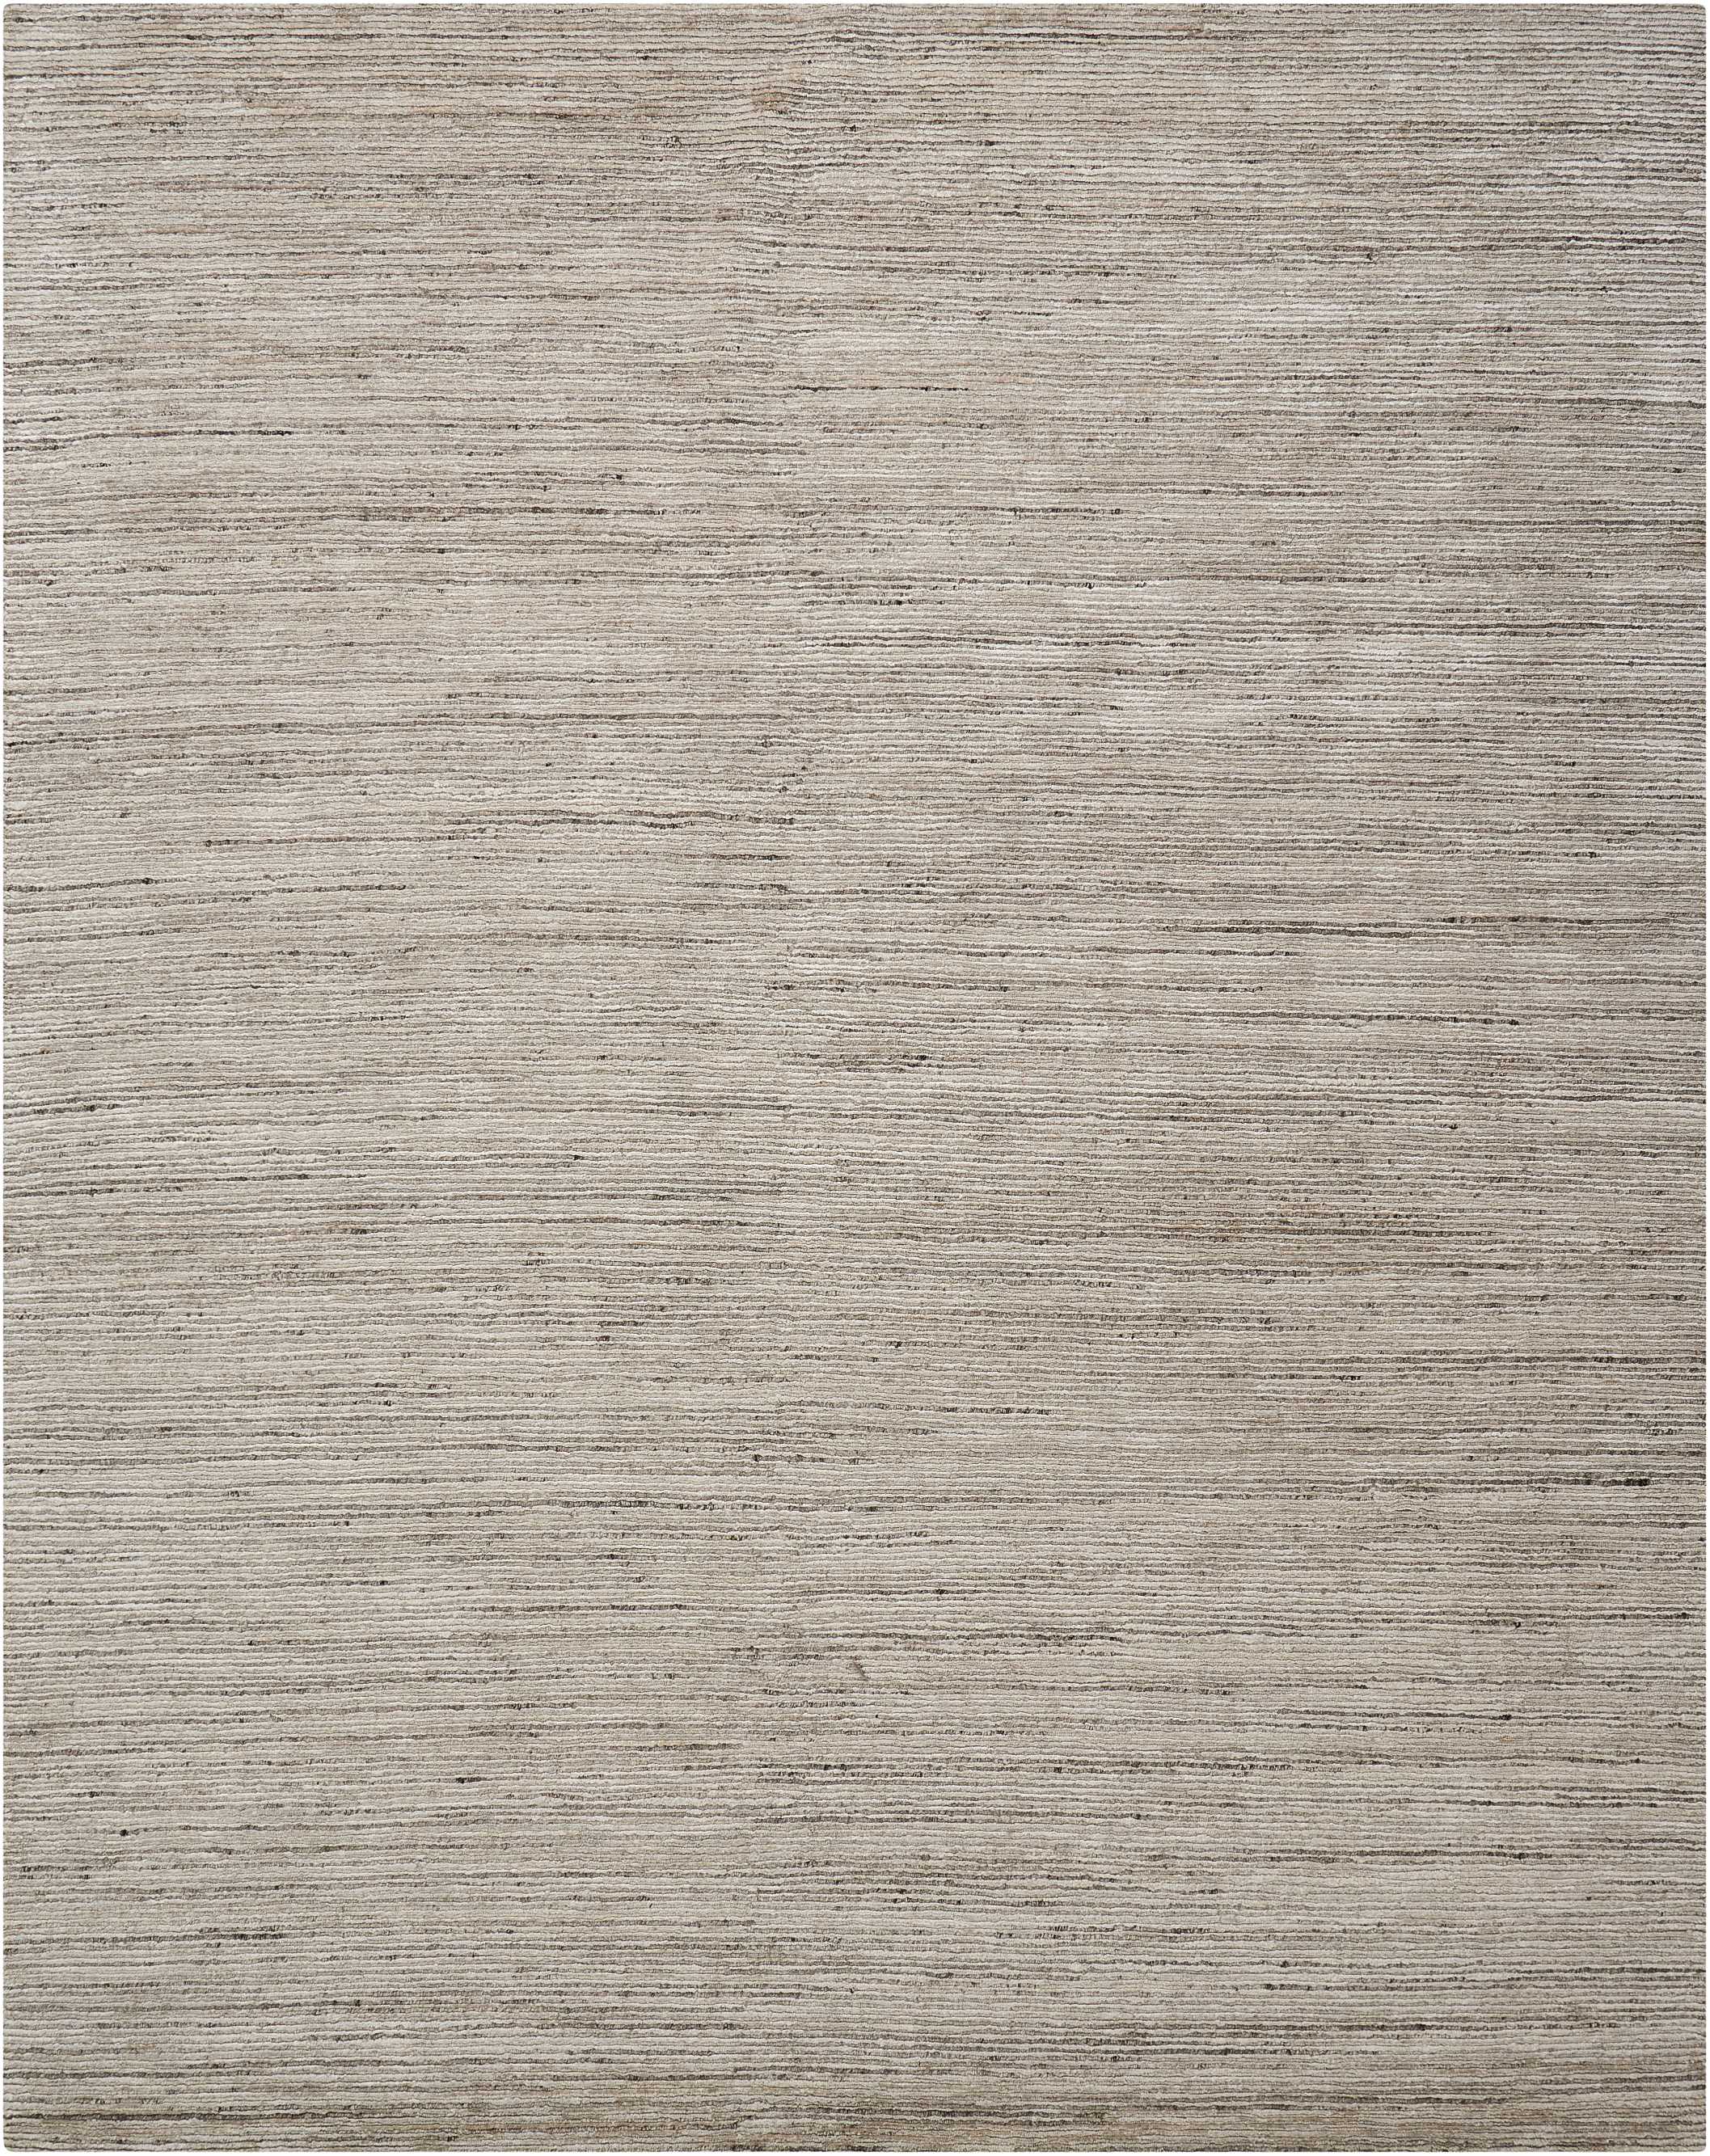 Neutral-toned textured surface with horizontal grain, resembling fabric or rug.